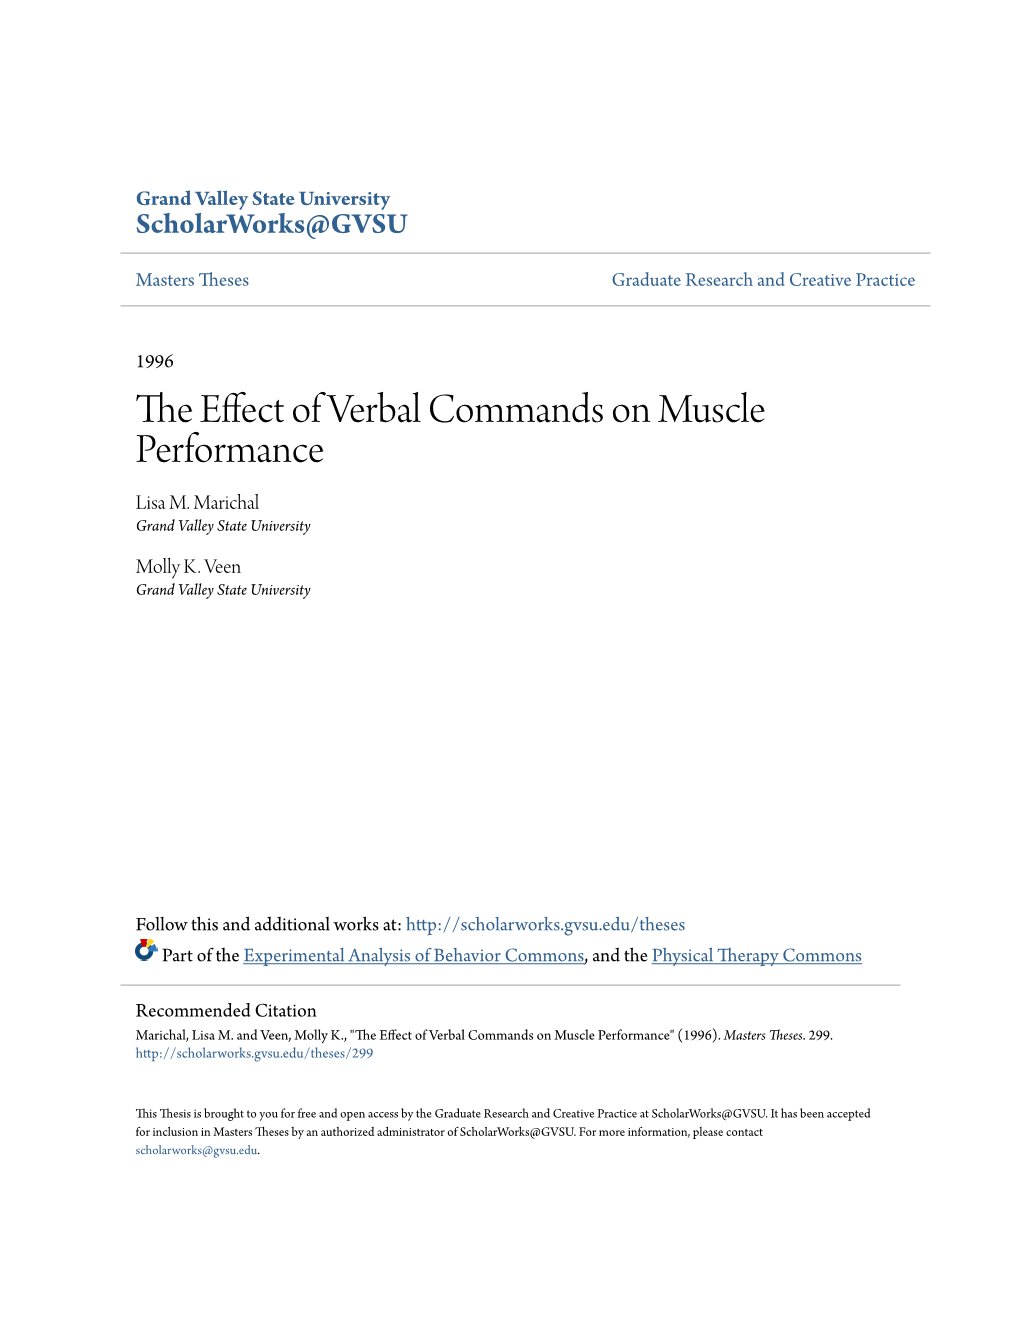 The Effect of Verbal Commands on Muscle Performance" (1996)